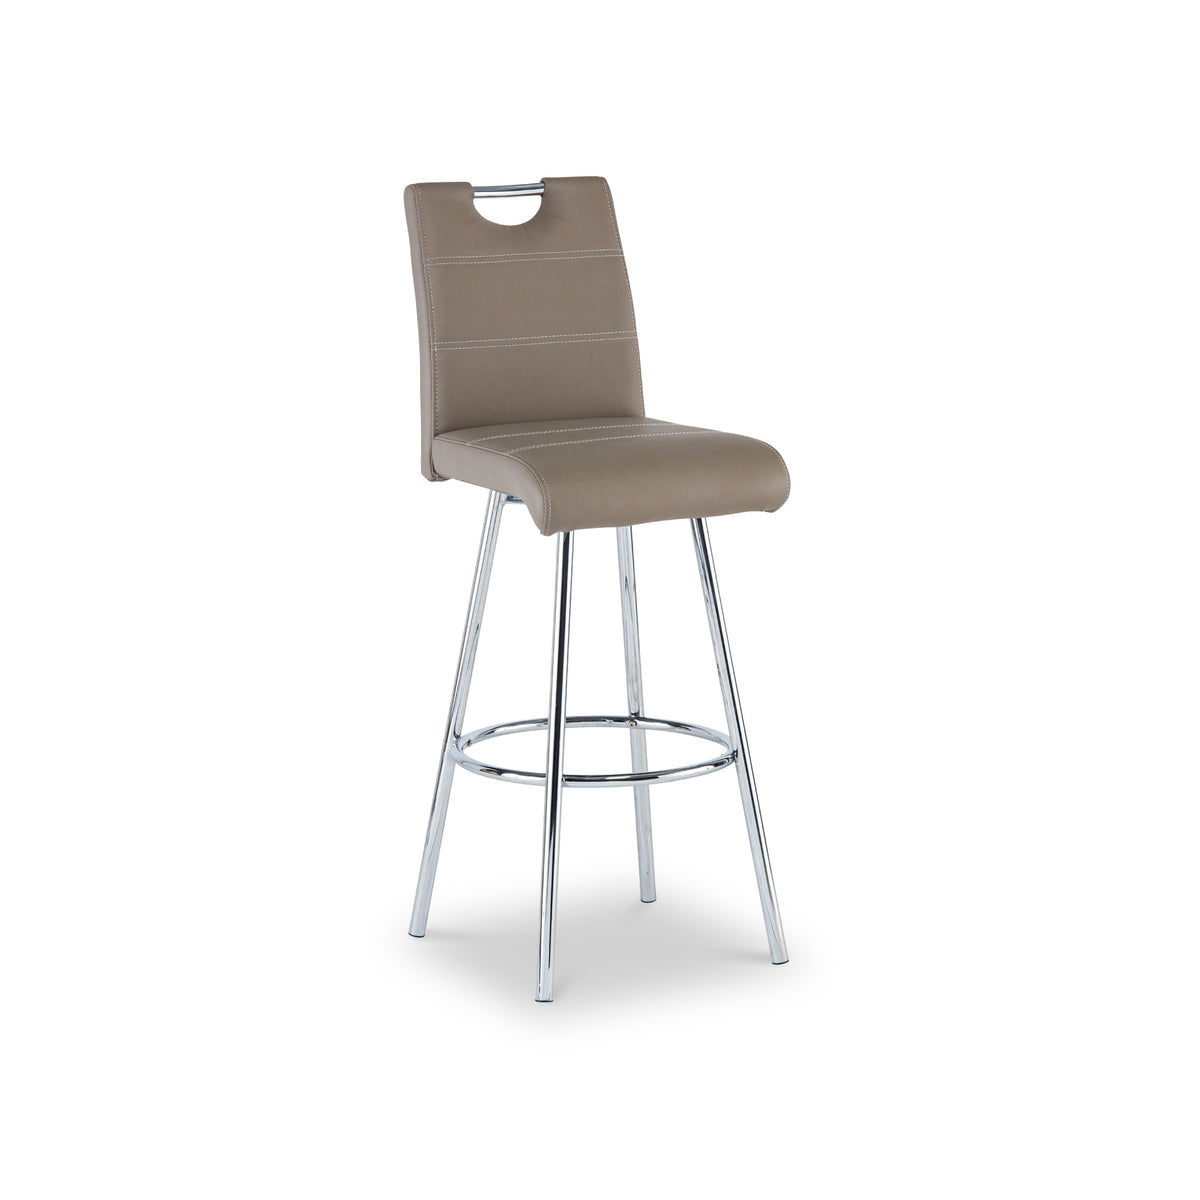 Simone Taupe Faux Leather Bar Stool from Roseland Furniture